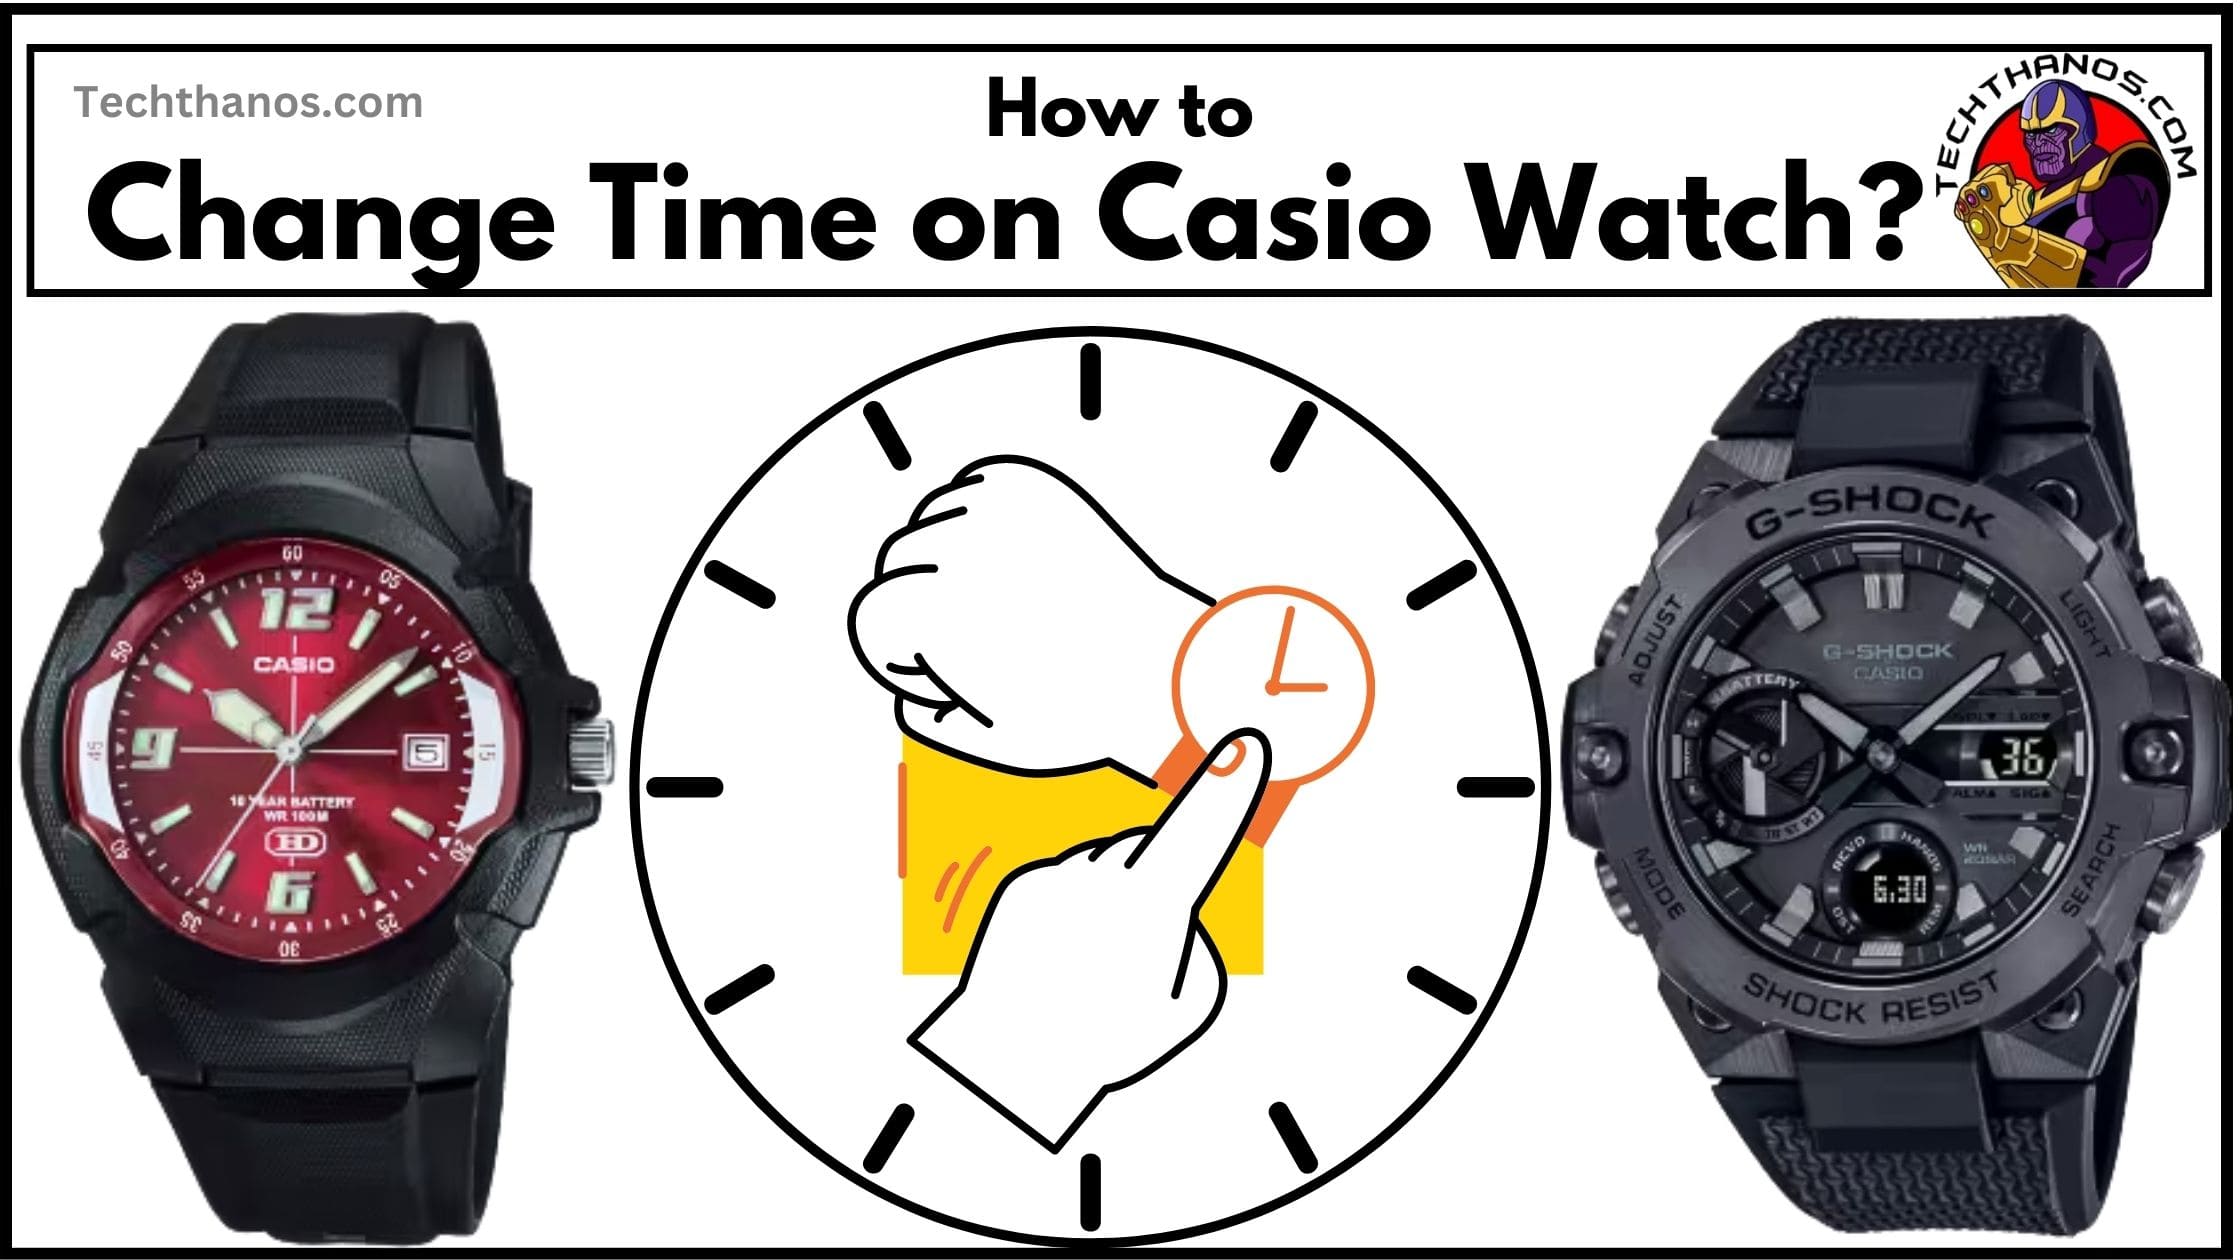 How to Change Time on Casio Watch?